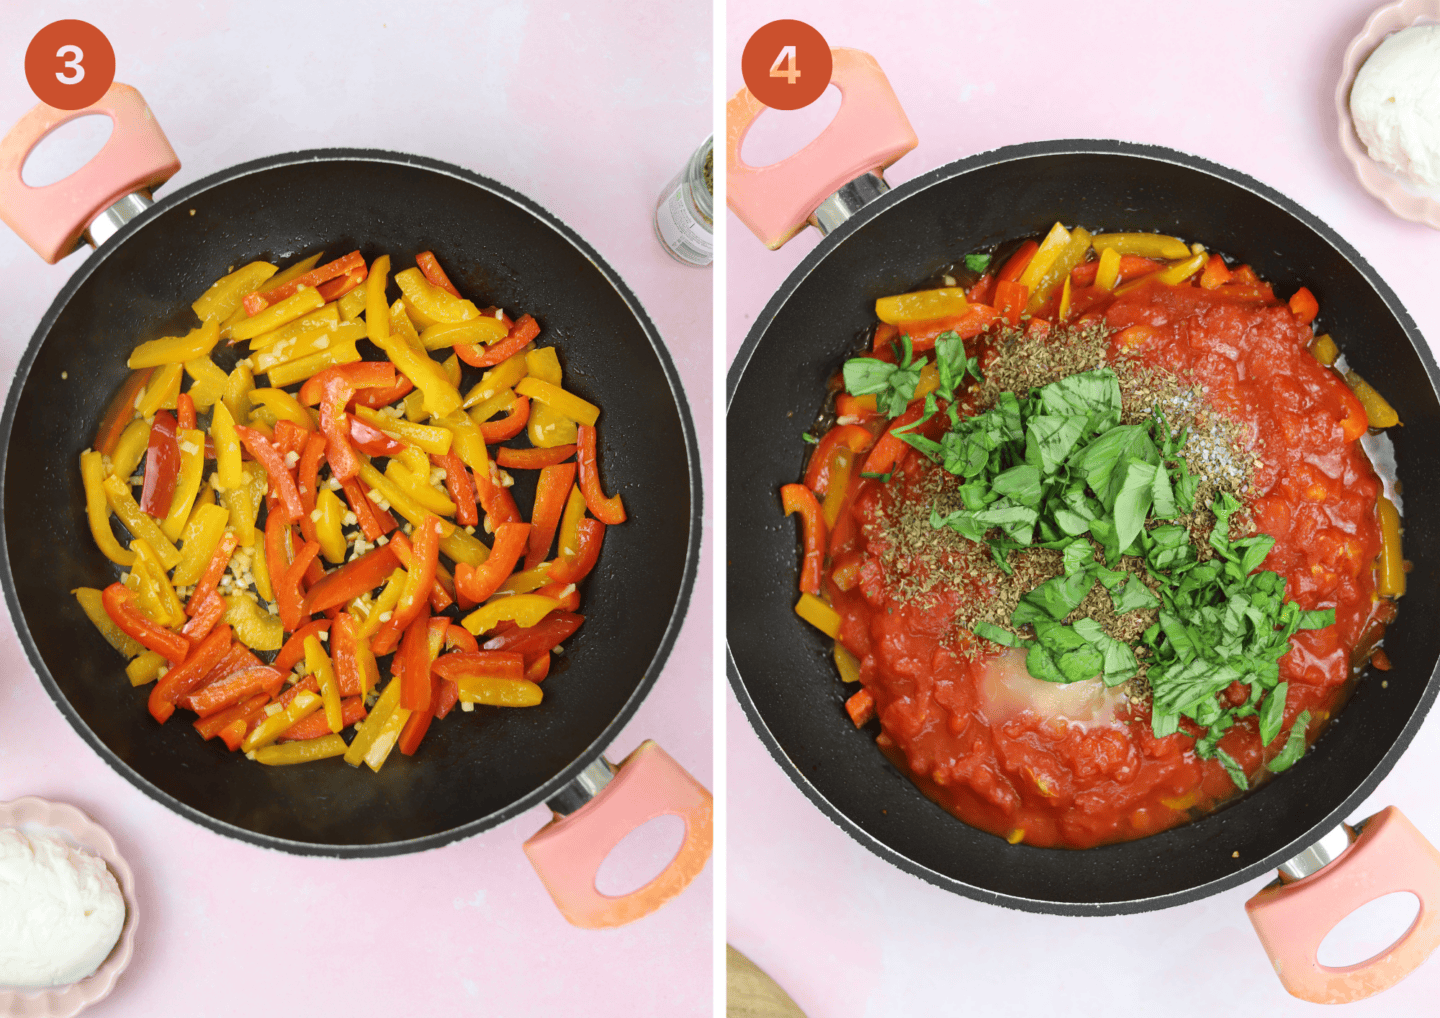 fry the peppers then add the pasta bake sauce ingredients to the pan.